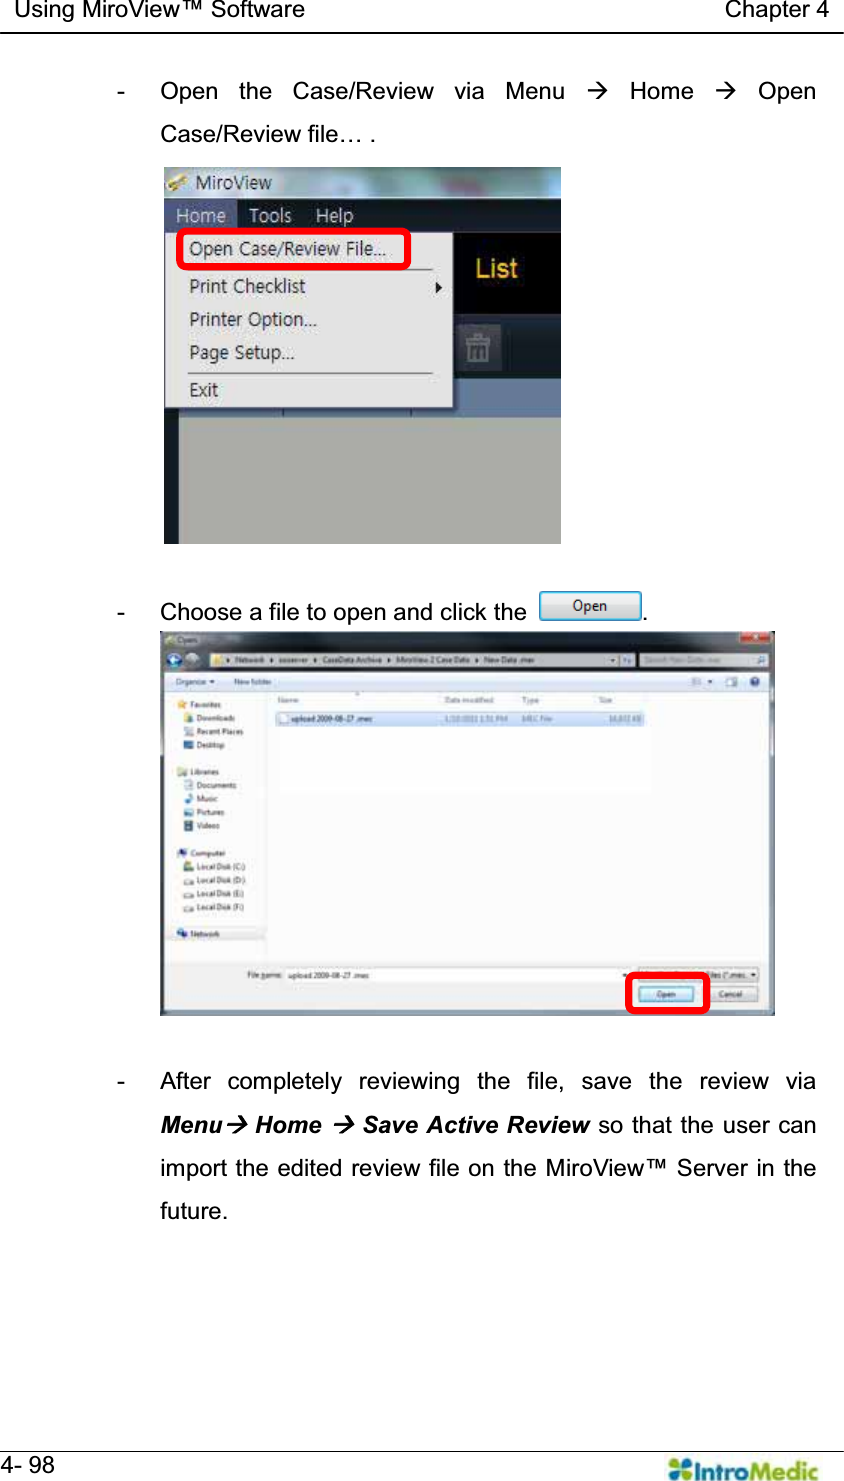   Using MiroView Software                                   Chapter 4   4- 98 -  Open the Case/Review via Menu Æ Home Æ Open &amp;DVH5HYLHZILOH«.  -  Choose a file to open and click the  .  -  After completely reviewing the file, save the review via MenuÆ Home Æ Save Active Review so that the user can import the edited review file on the MLUR9LHZ6HUYHULQWKHfuture. 